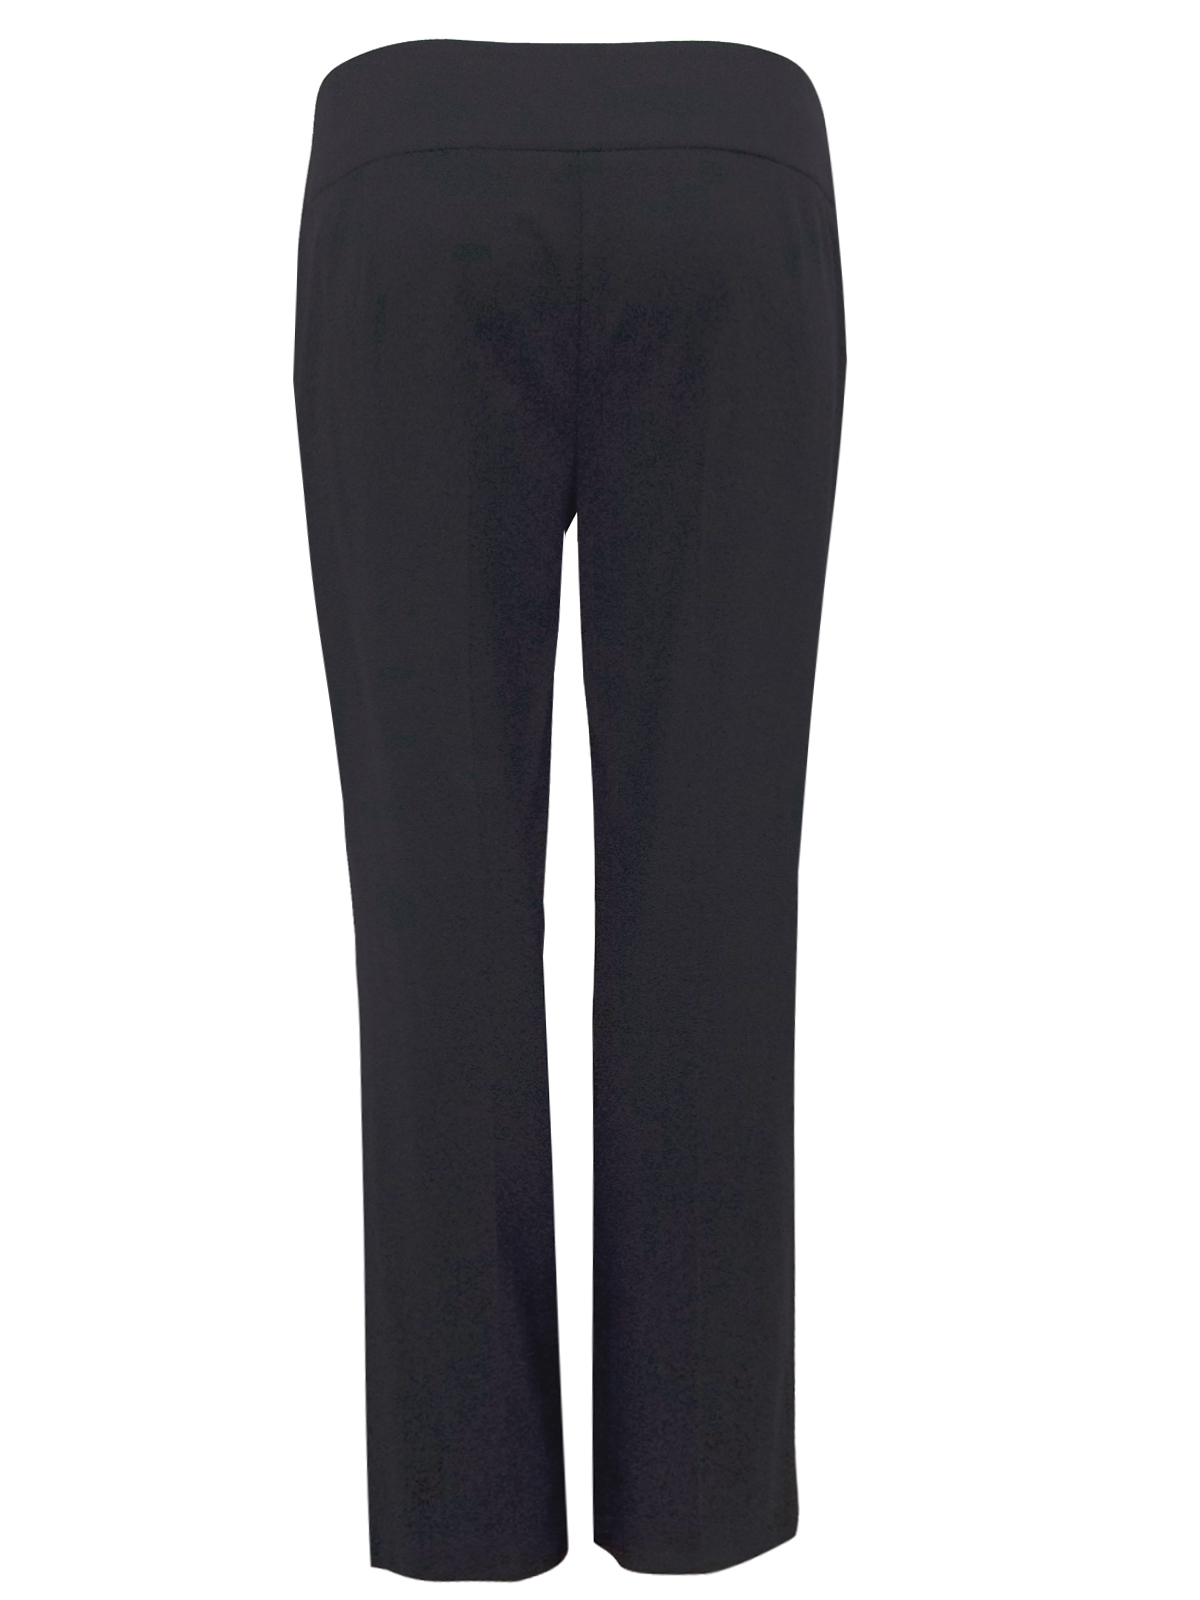 Marks and Spencer - - M&5 BLACK Slim Bootleg Wide Waist Trousers - Size 12